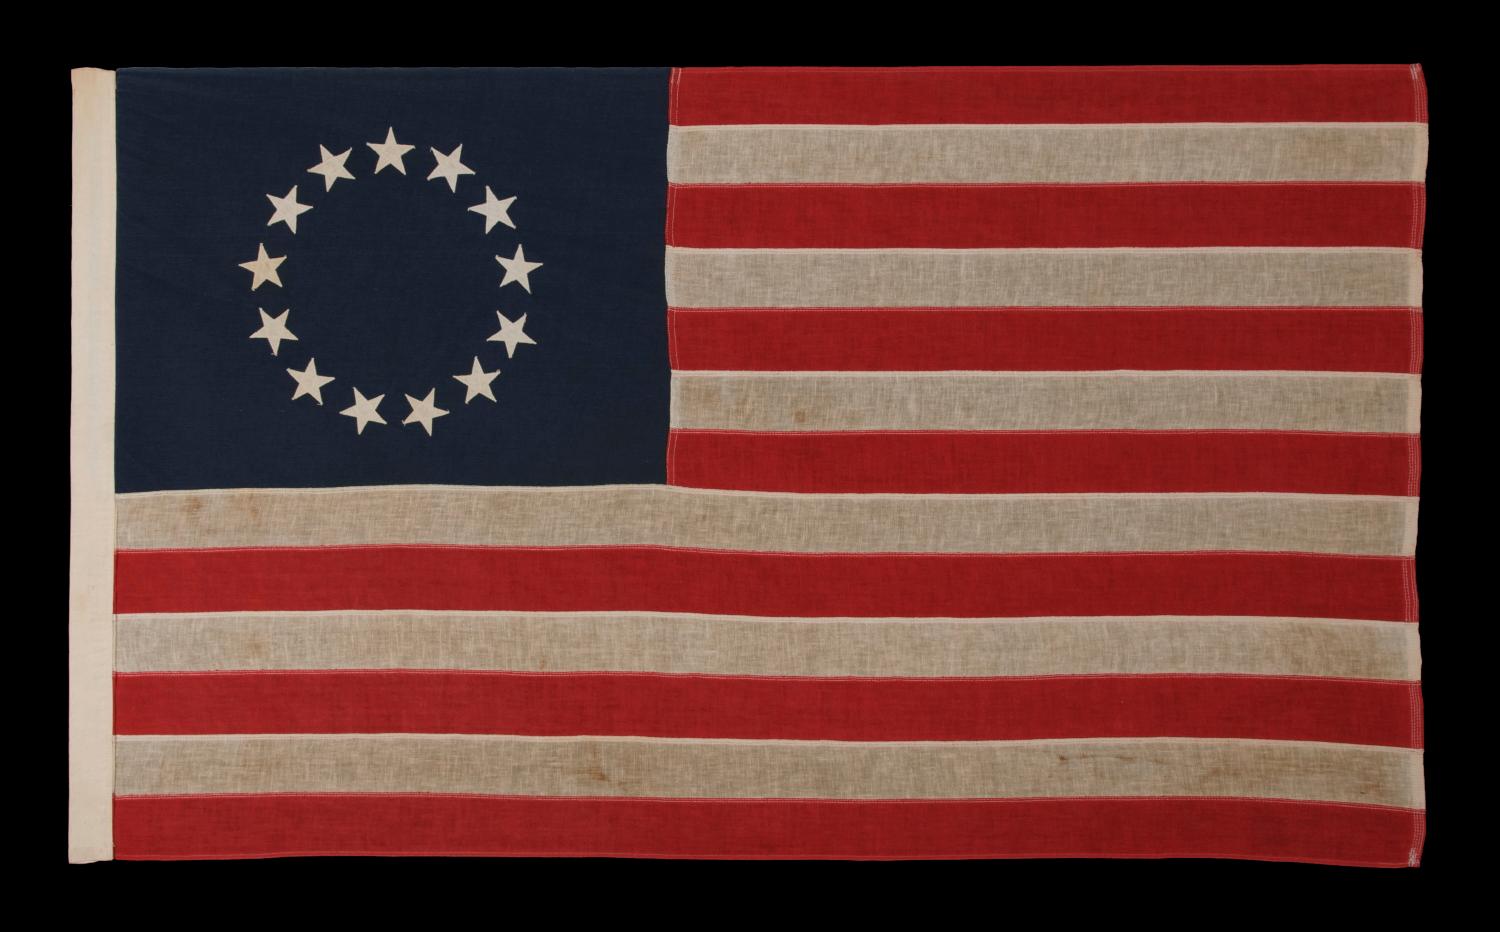 13 STARS IN THE BETSY ROSS PATTERN, A SCARCE SEWN EXAMPLE IN A DESIRABLE SMALL SCALE, 1900-1930: 

13 star American national flag, made in the period between approximately 1900 and 1930. The stars are arranged in the circular wreath pattern most